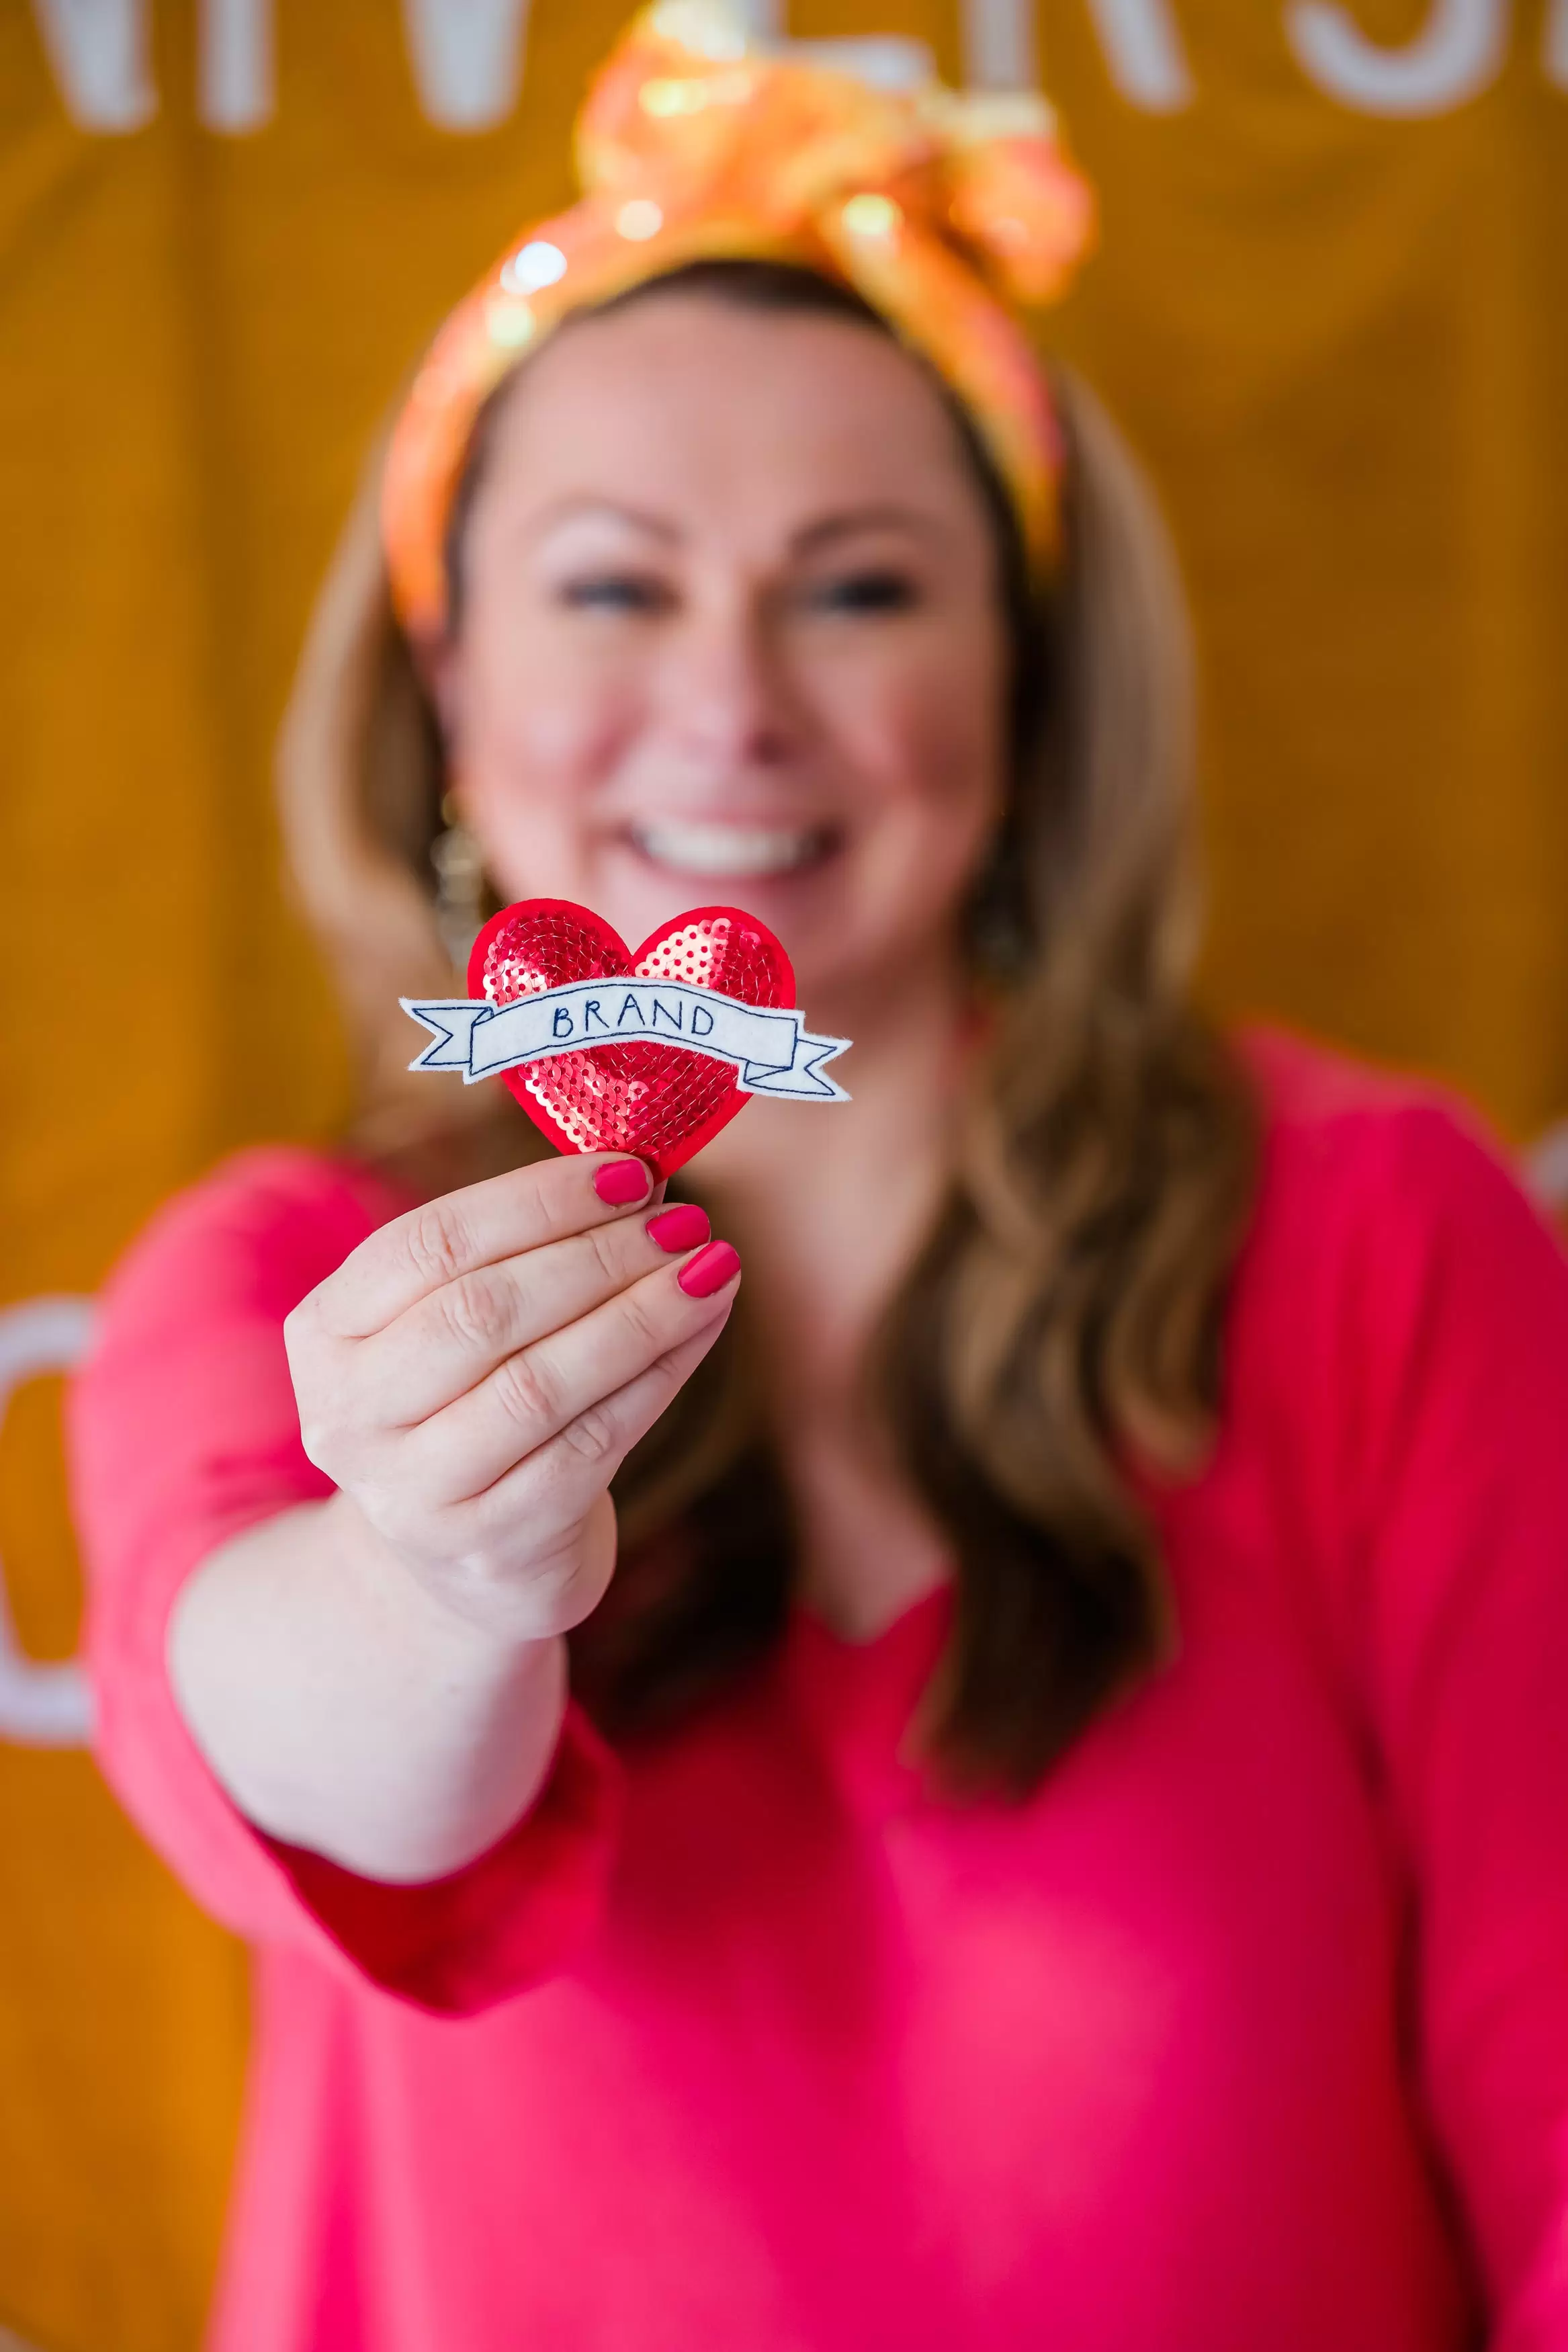 Holly Tucker, founder of Holly & Co, wearing a pink jumper and holding a Brand sequin heart. 